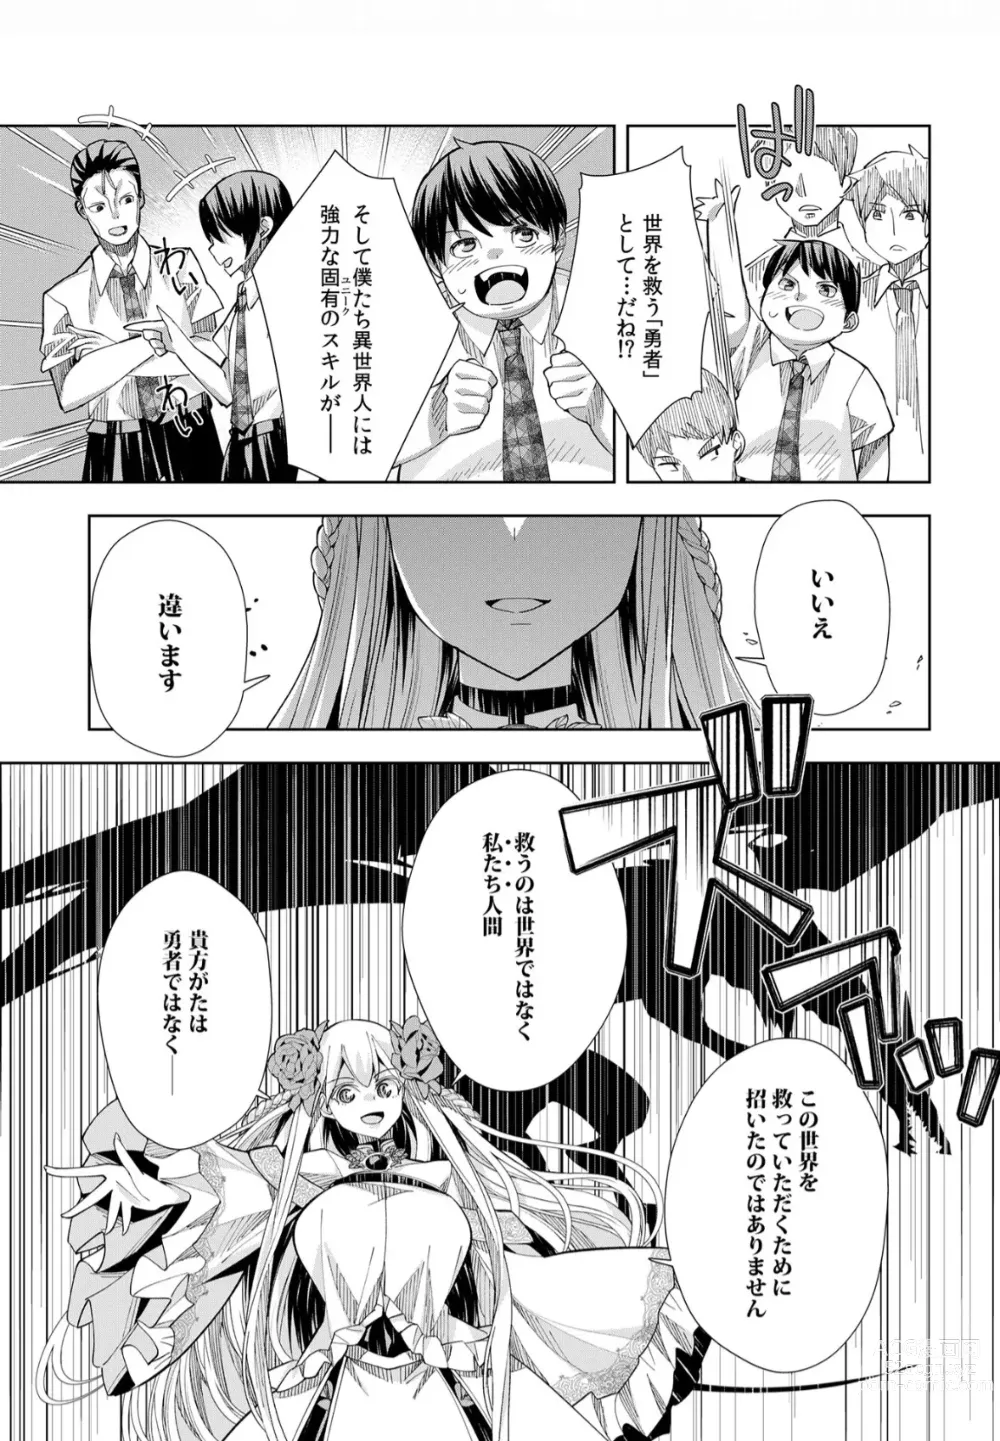 Page 24 of manga Youkoso Isekai e, Dewa Shinde Kudasai. - Welcome to another world then please die Ch. 1